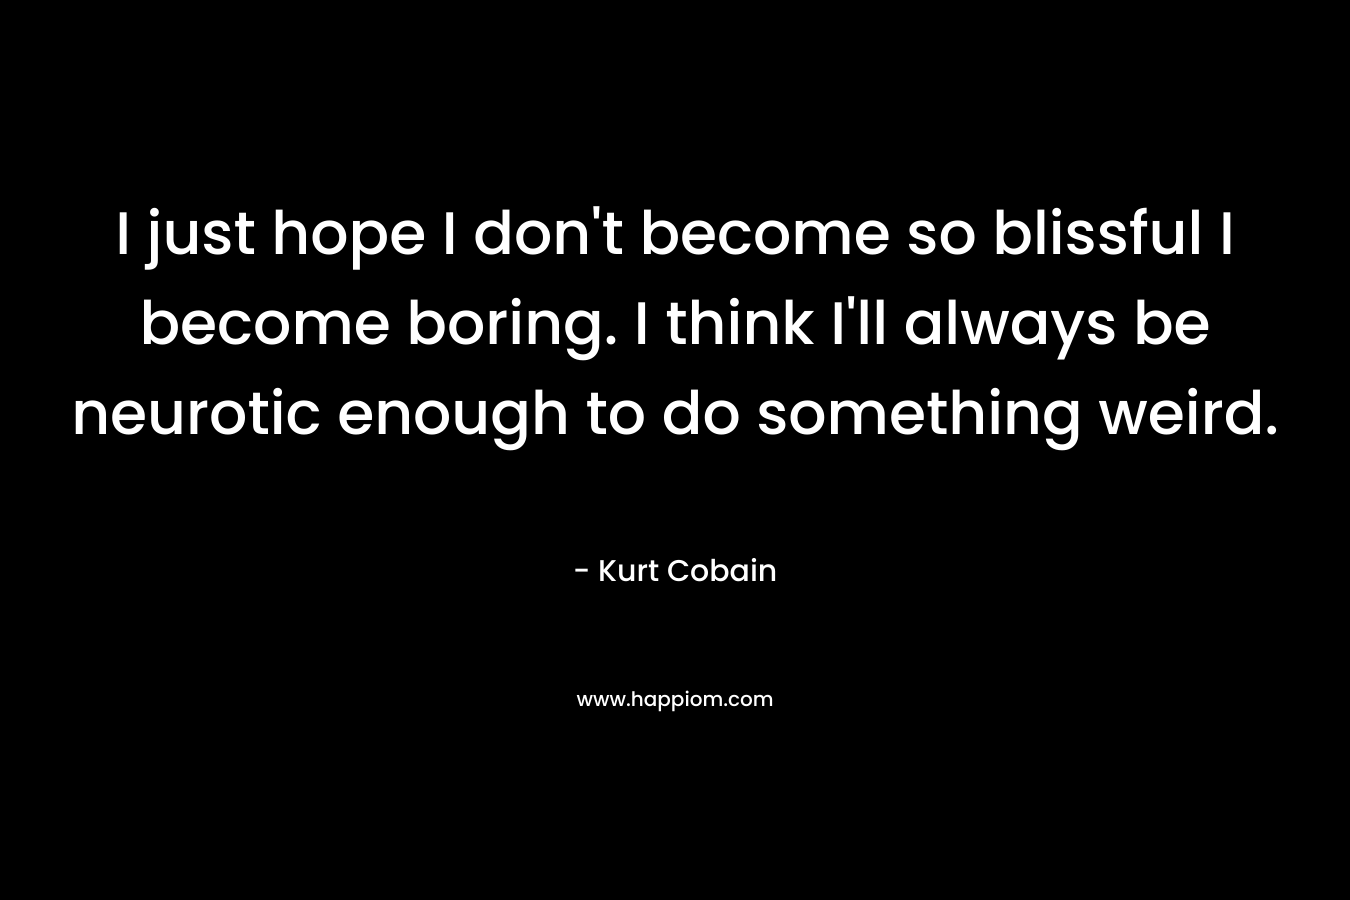 I just hope I don’t become so blissful I become boring. I think I’ll always be neurotic enough to do something weird. – Kurt Cobain